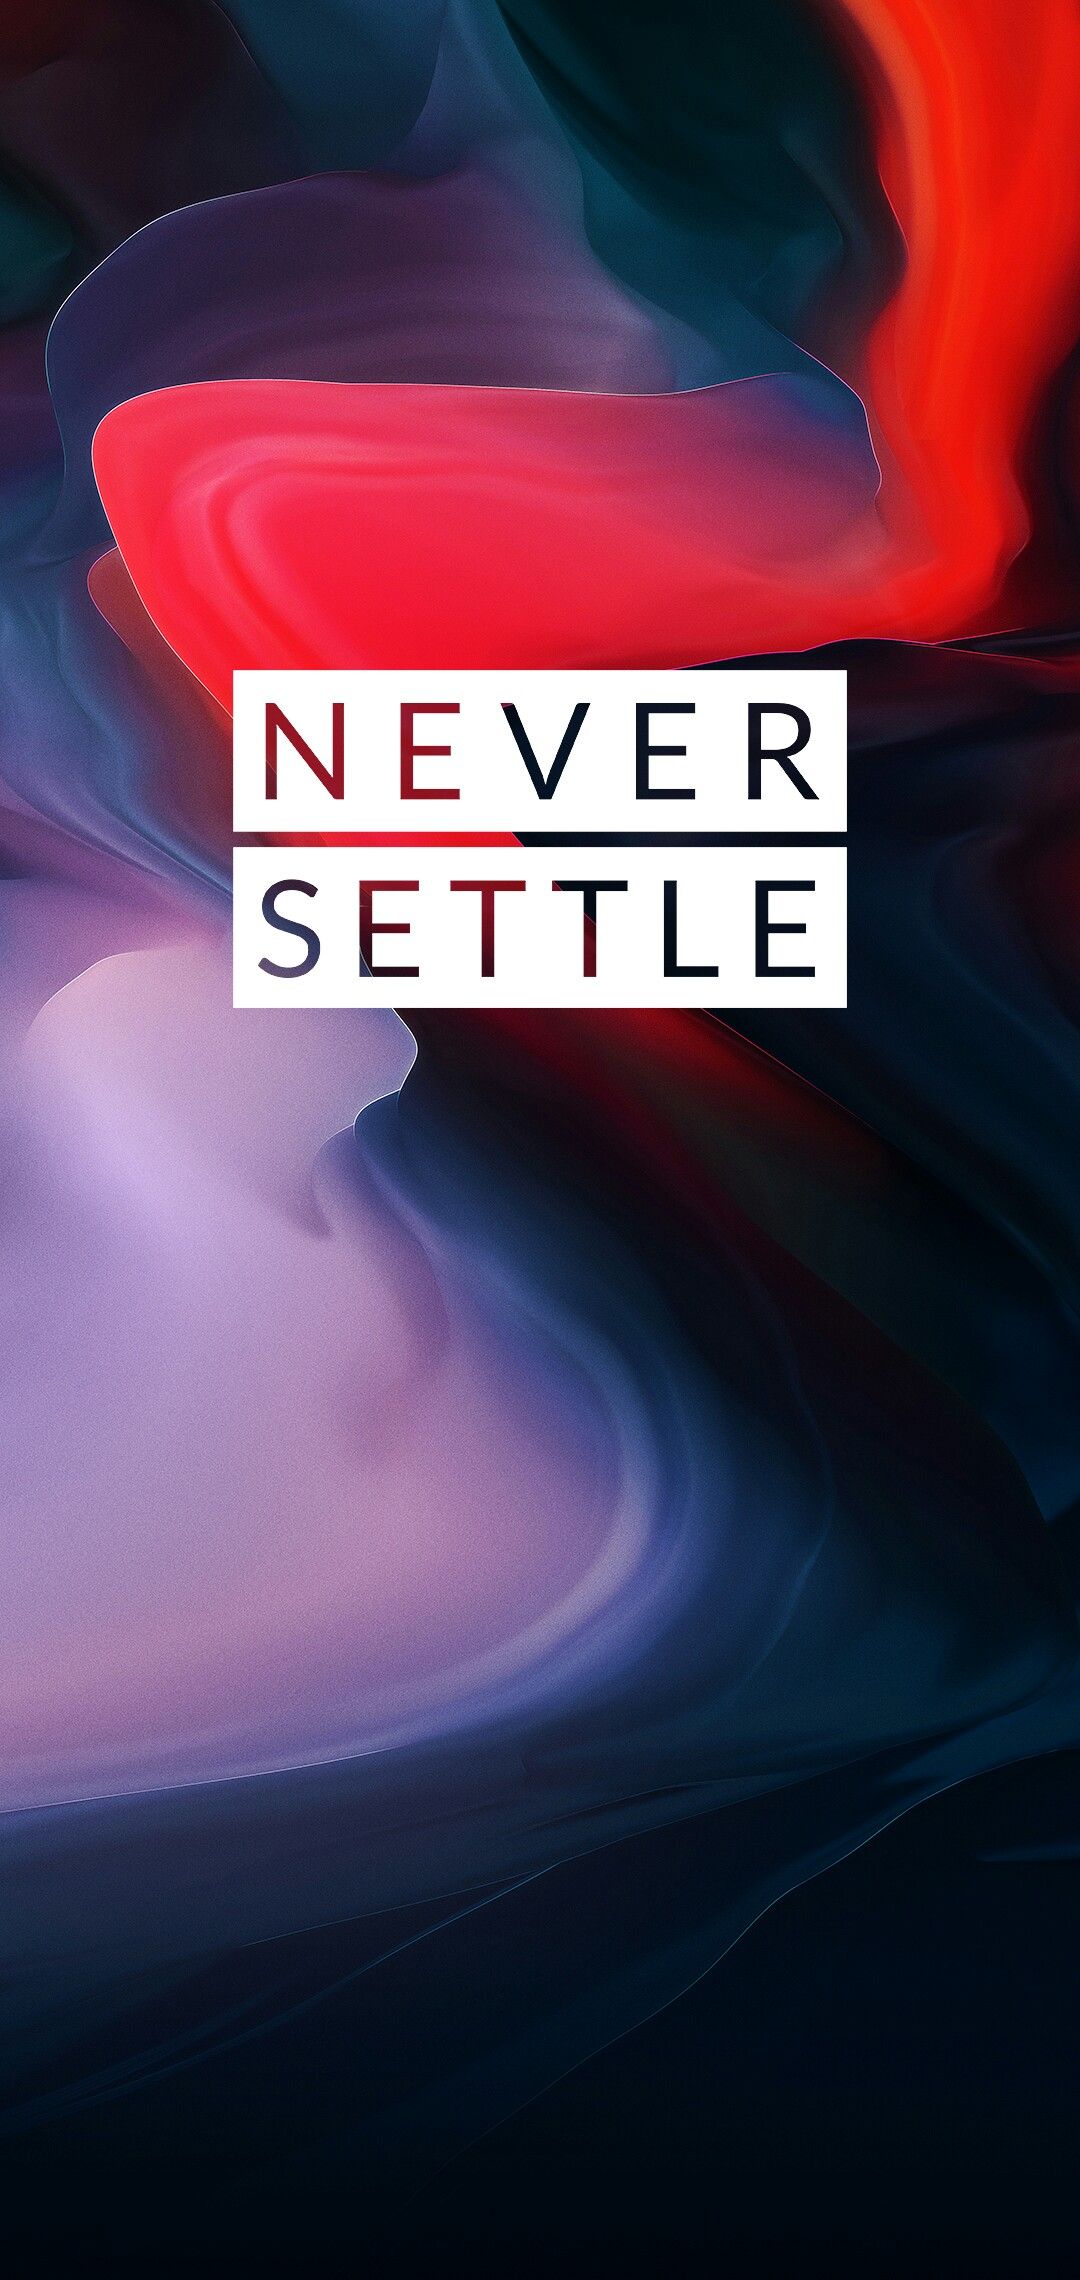 Oneplus 6 Never Settle - Oneplus Wallpapers 4k Download , HD Wallpaper & Backgrounds